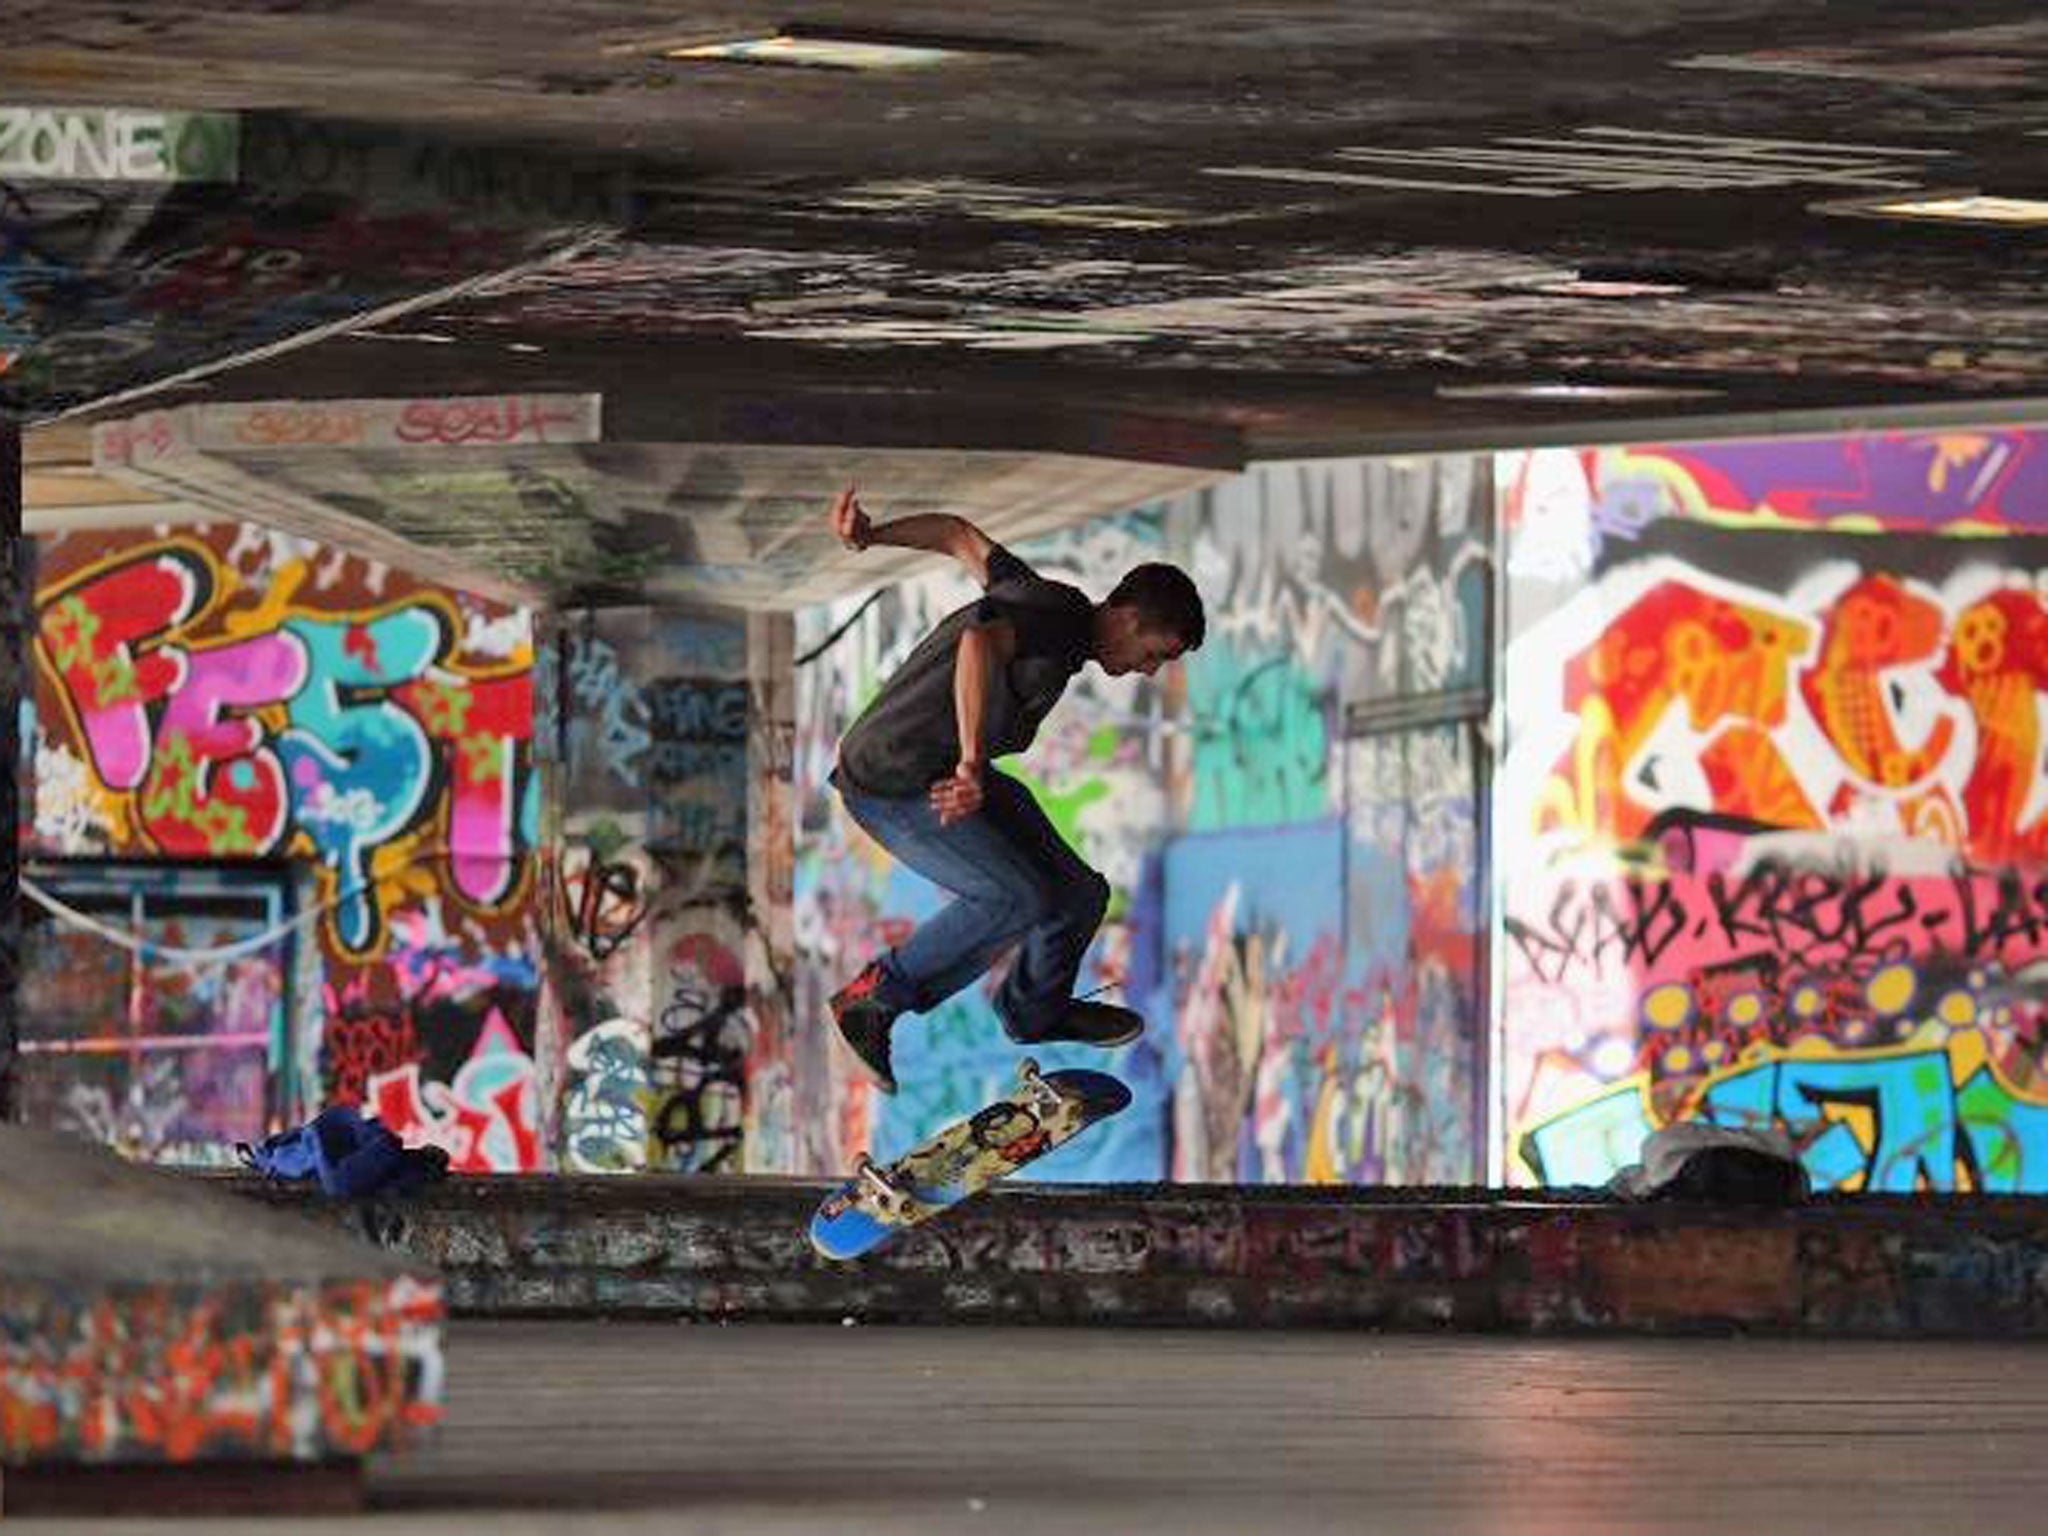 A skater makes a jump in the South Bank skatepark (Getty Images)